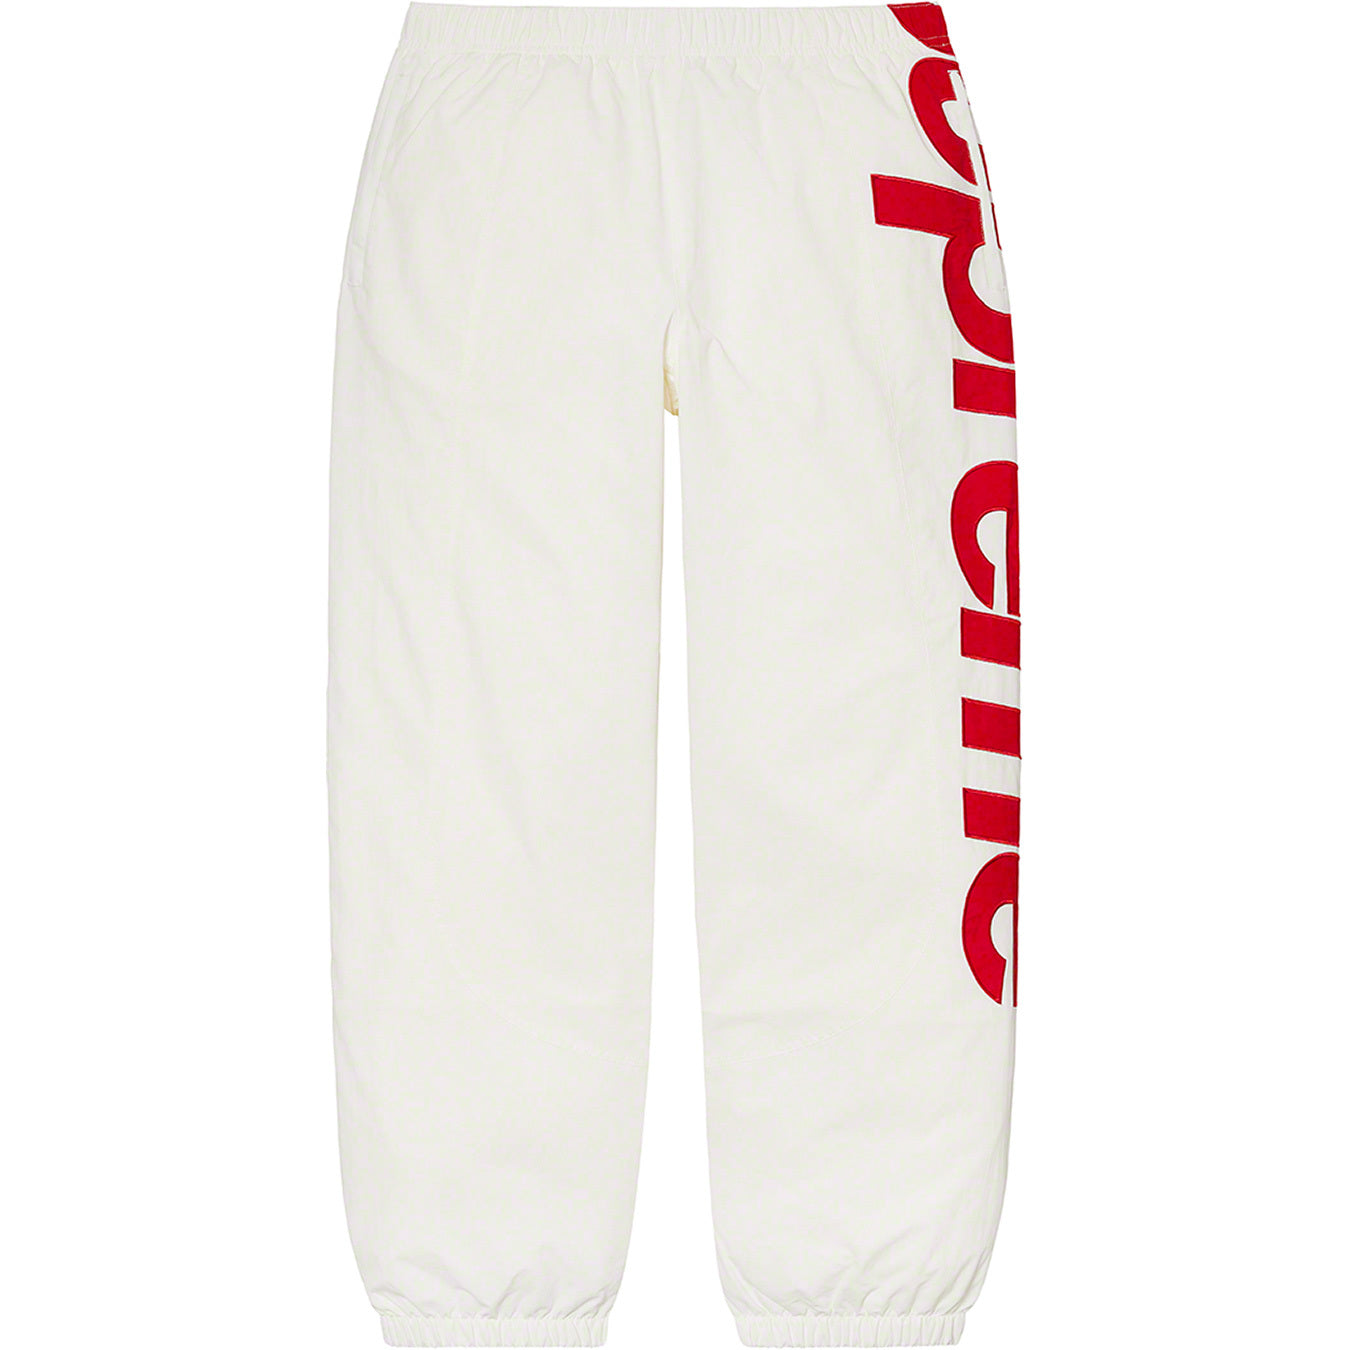 Supreme_Spellout_Track_Pant_5.jpg